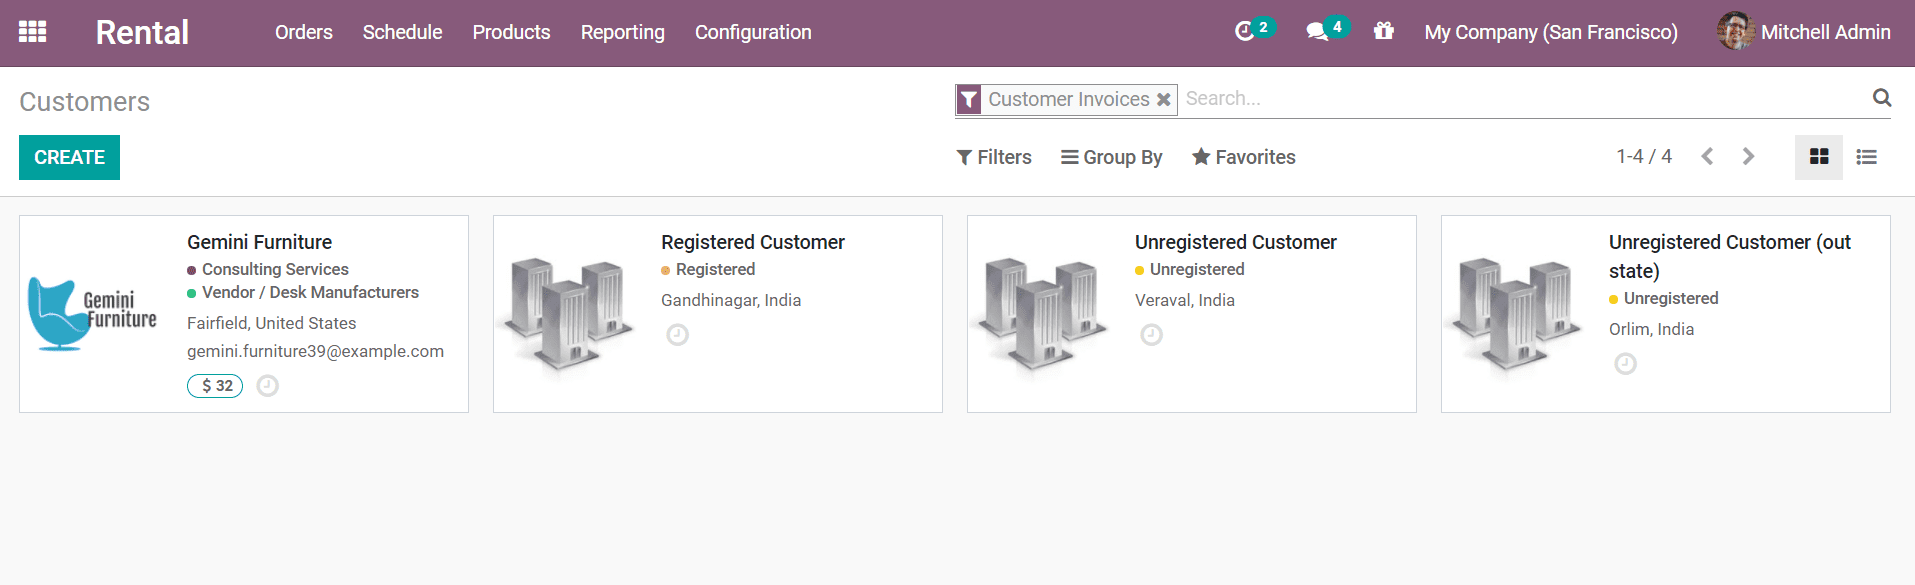 how-to-manage-your-rental-service-with-odoo-14